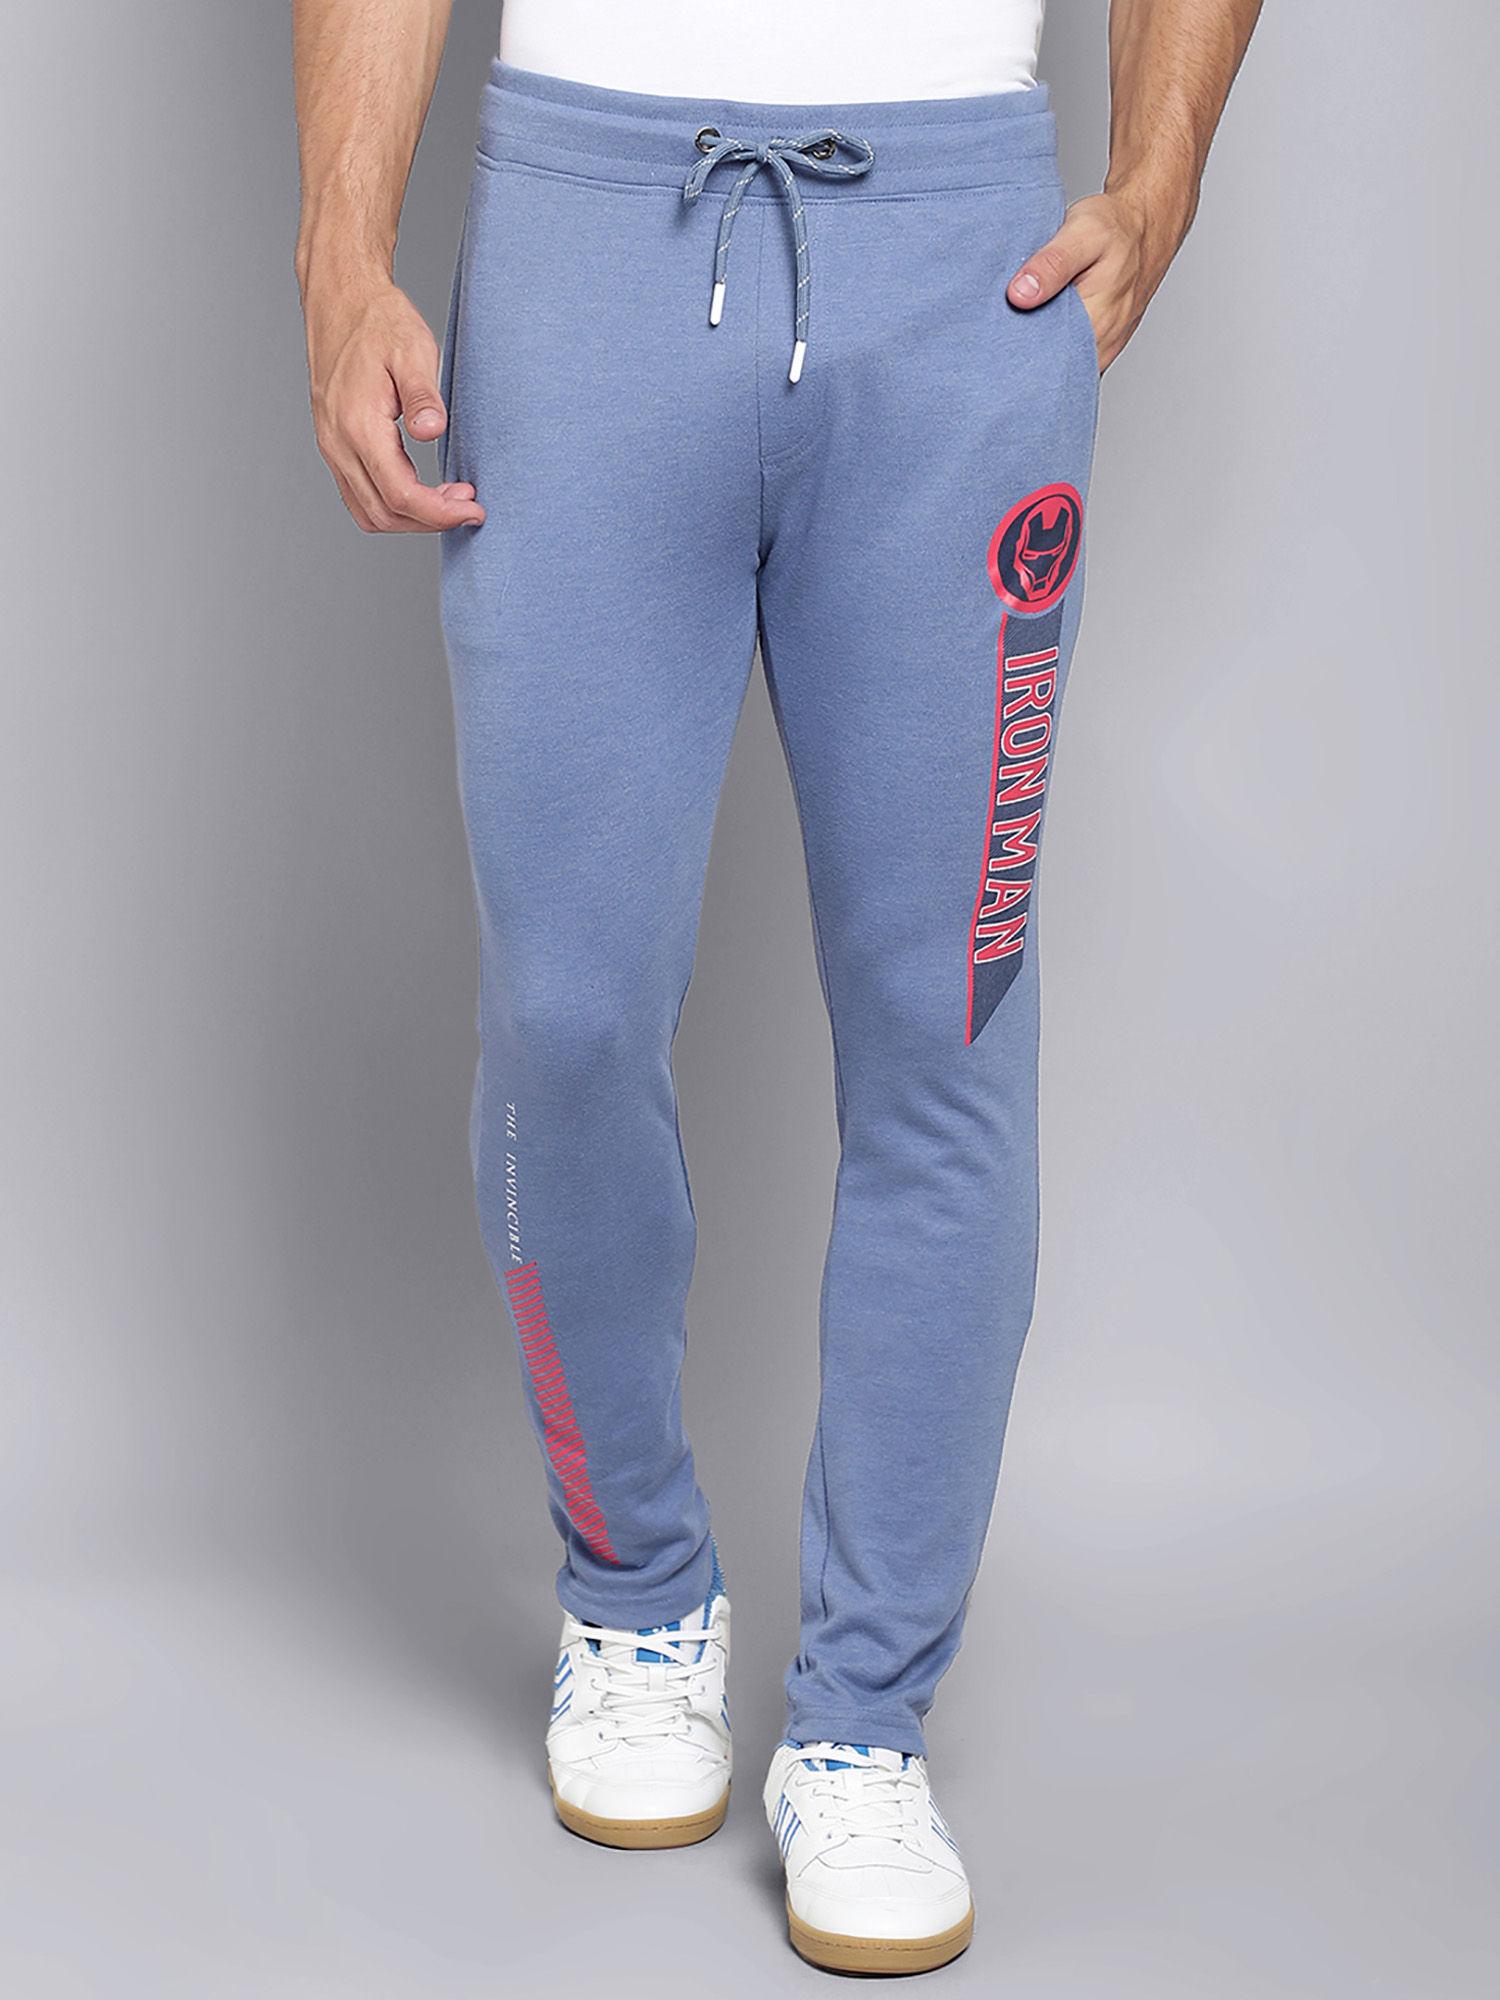 iron man featured blue jogger for men